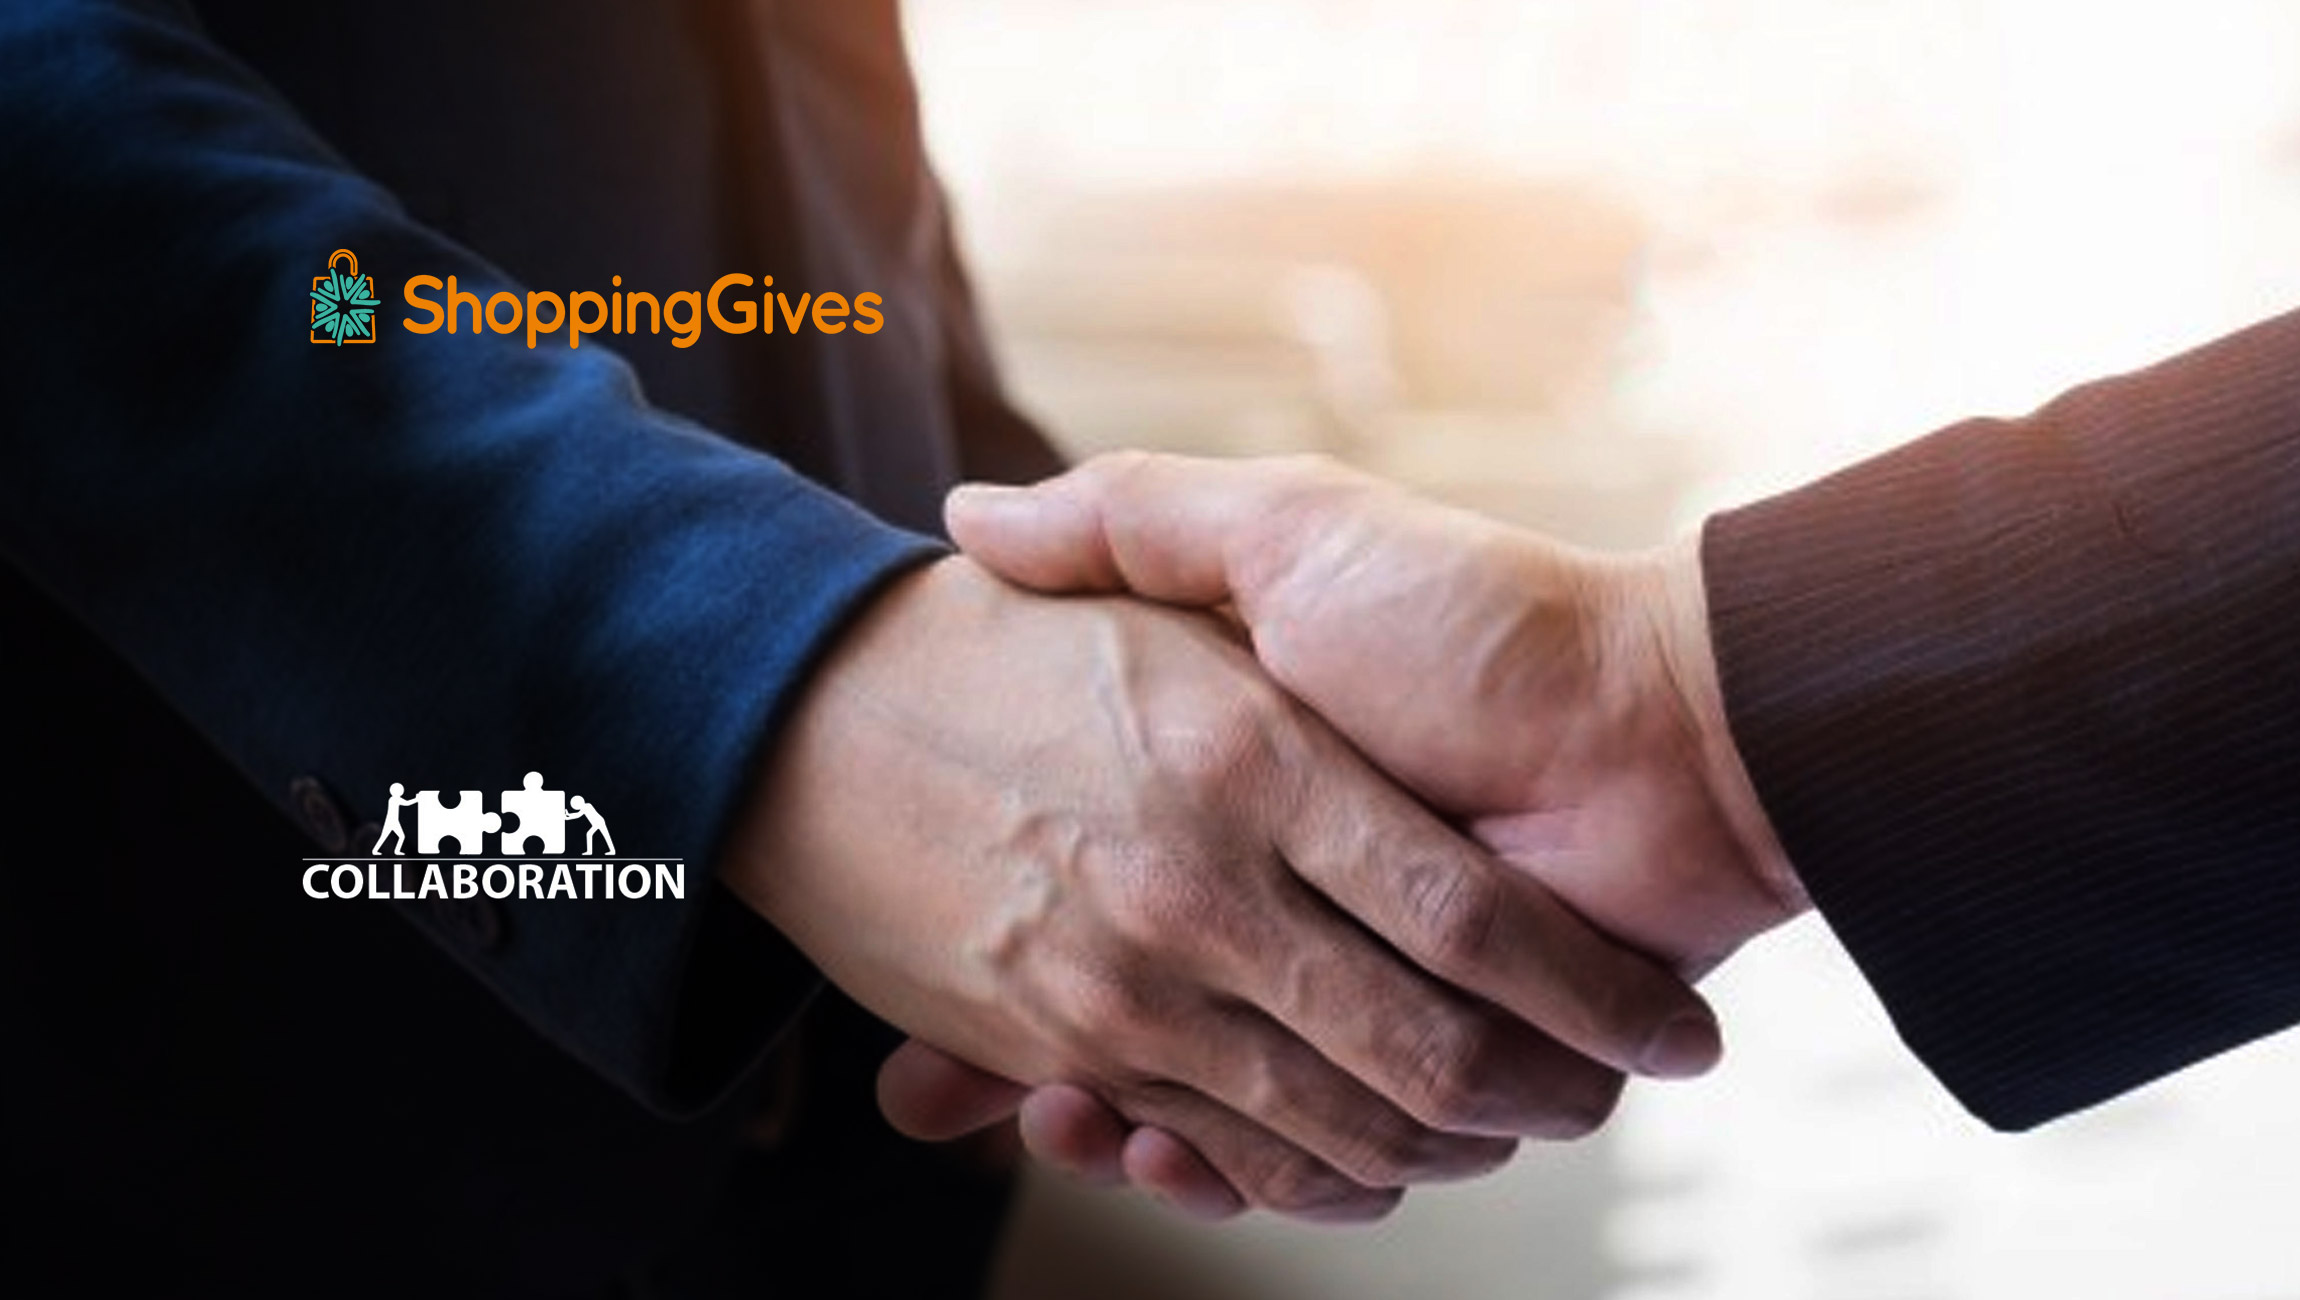 Shoppinggives Launches Customer Round-up Donations With Shopify POS to Multiply Charitable Contributions to Nonprofits